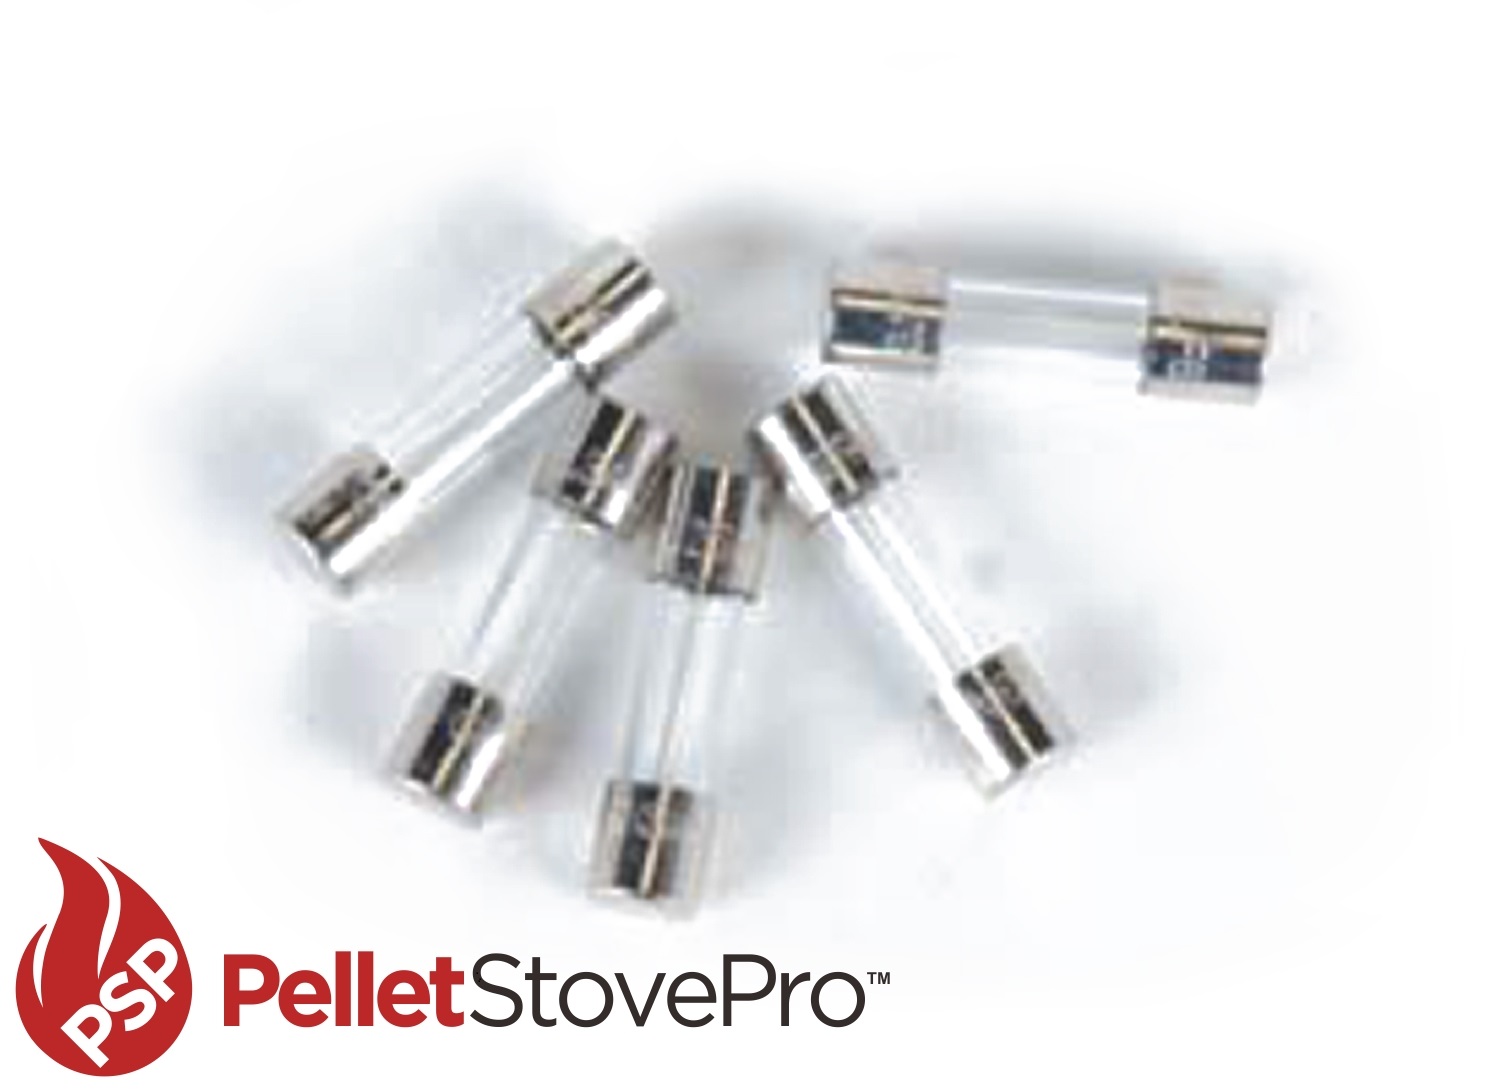 FIVE Breckwell Pellet Stove Fuses exact replacement for C-E-046-N 5 Amp 